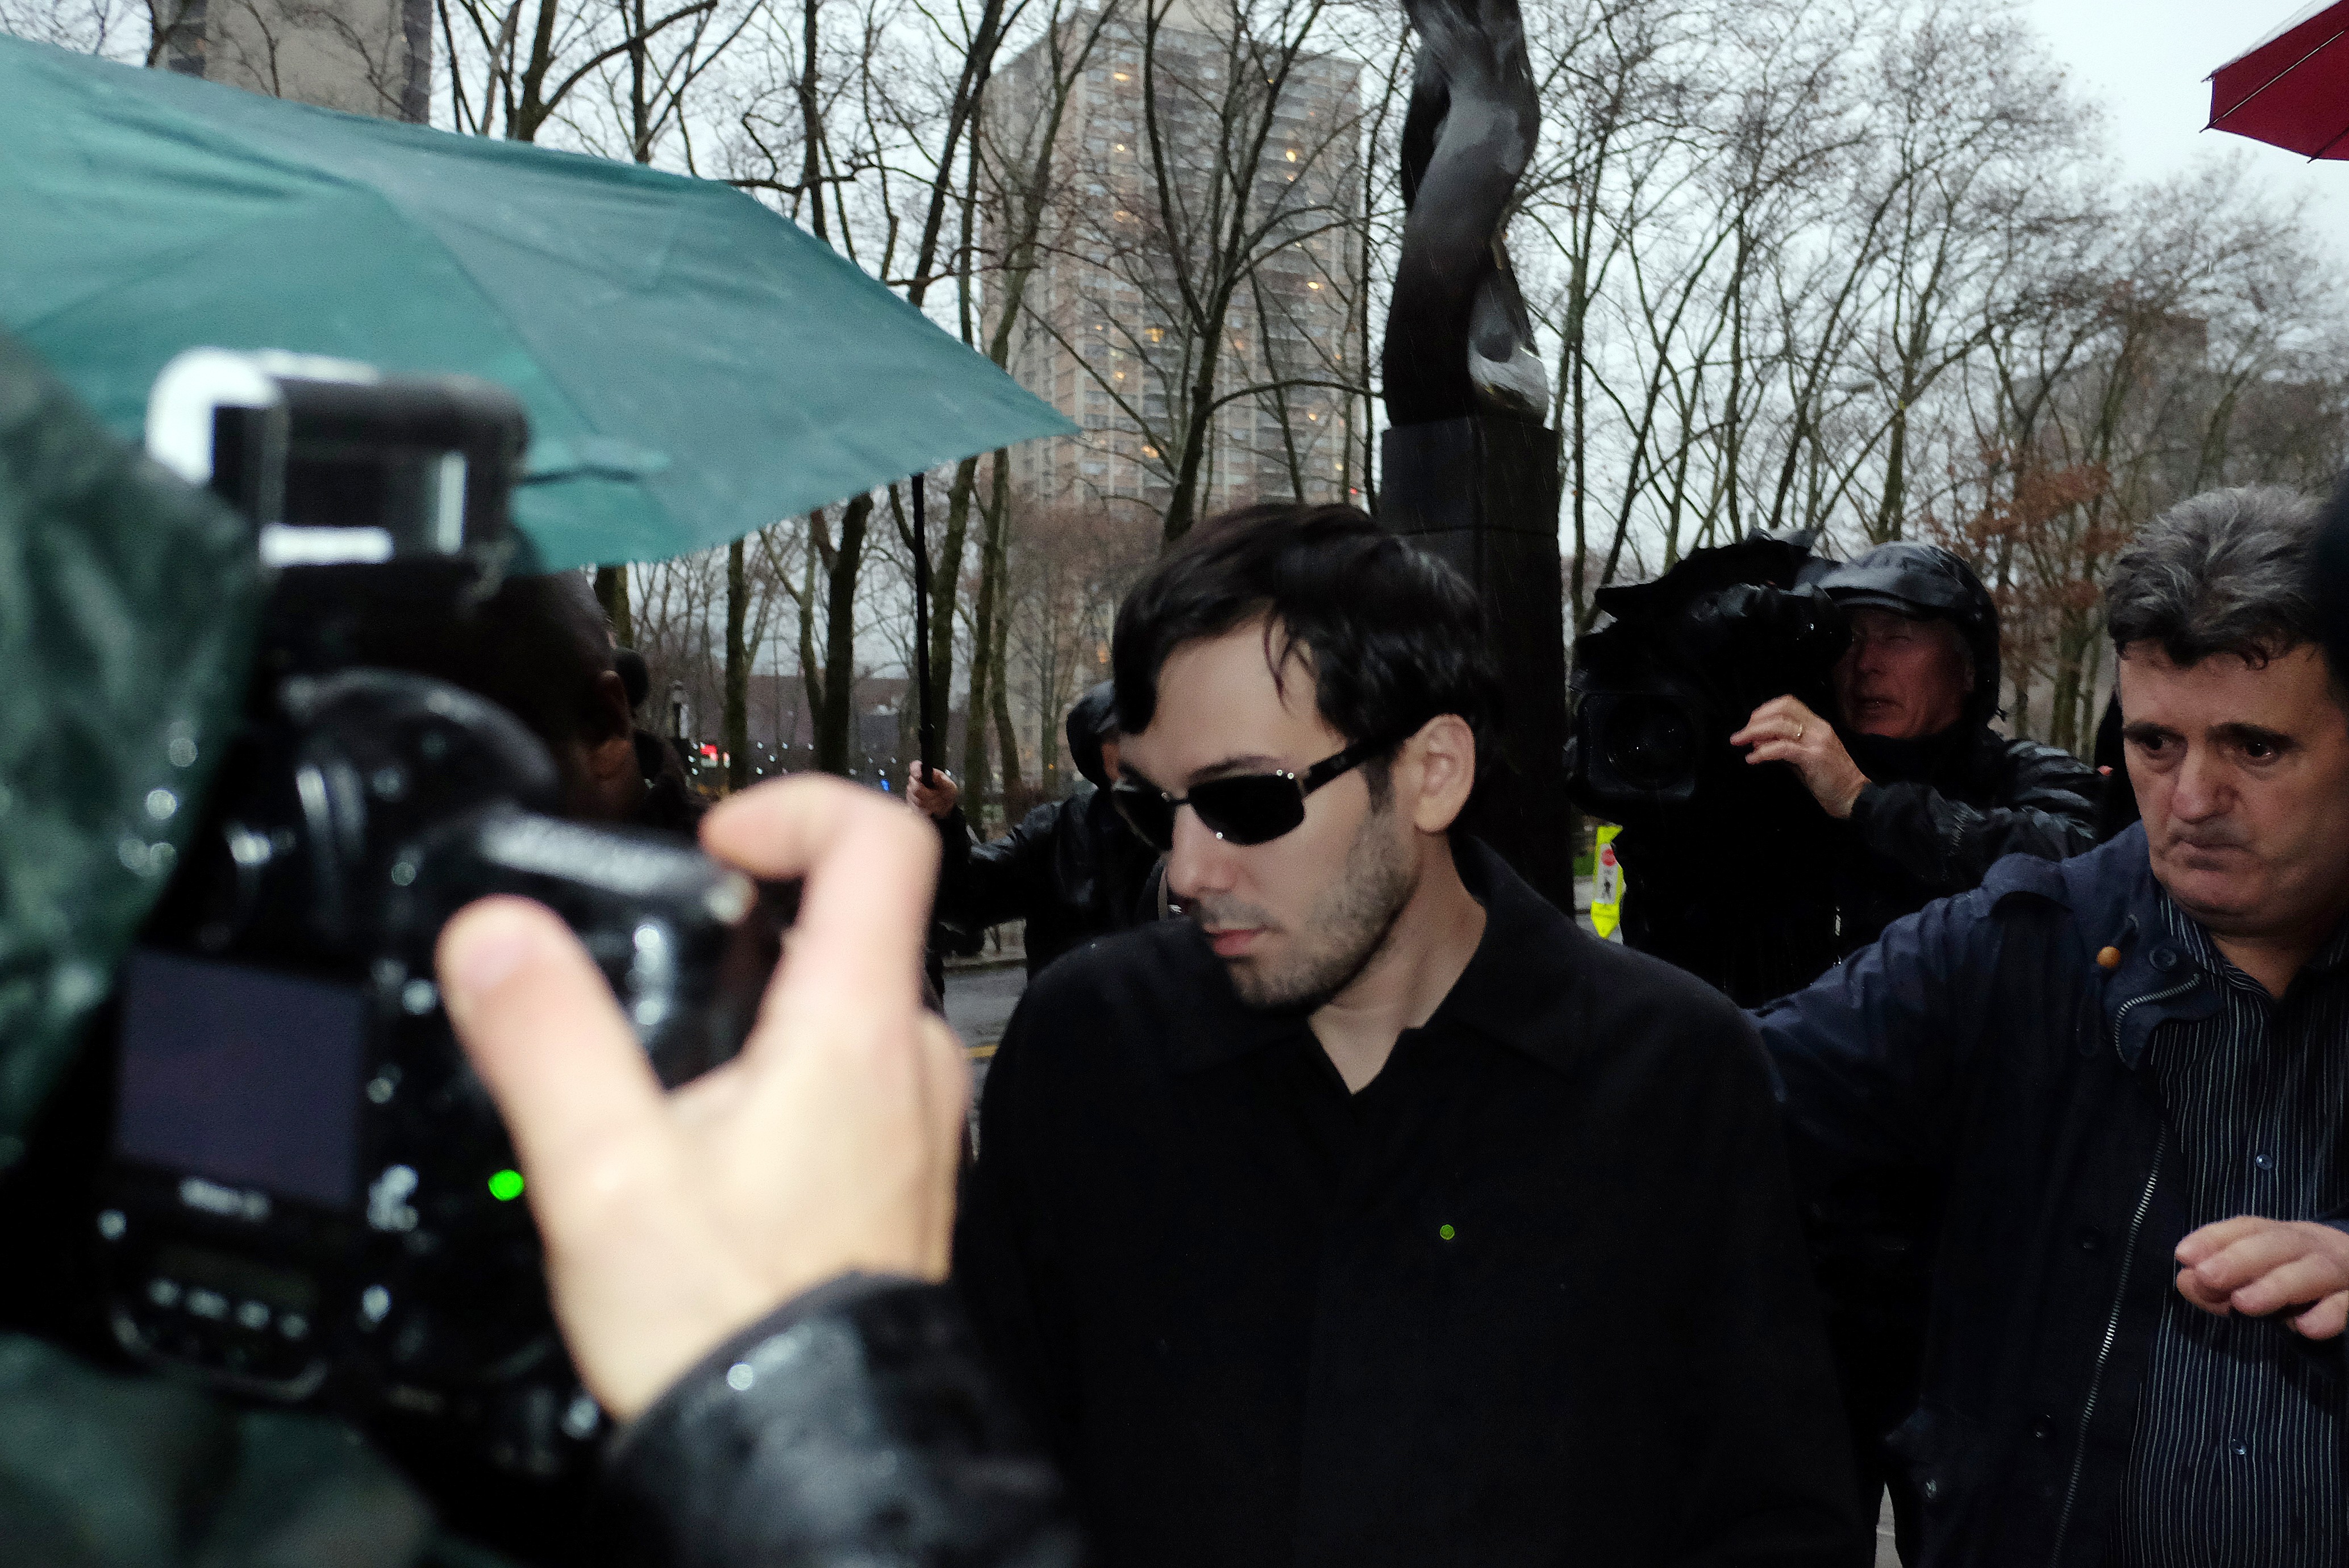 Shkreli leaving court after getting bail